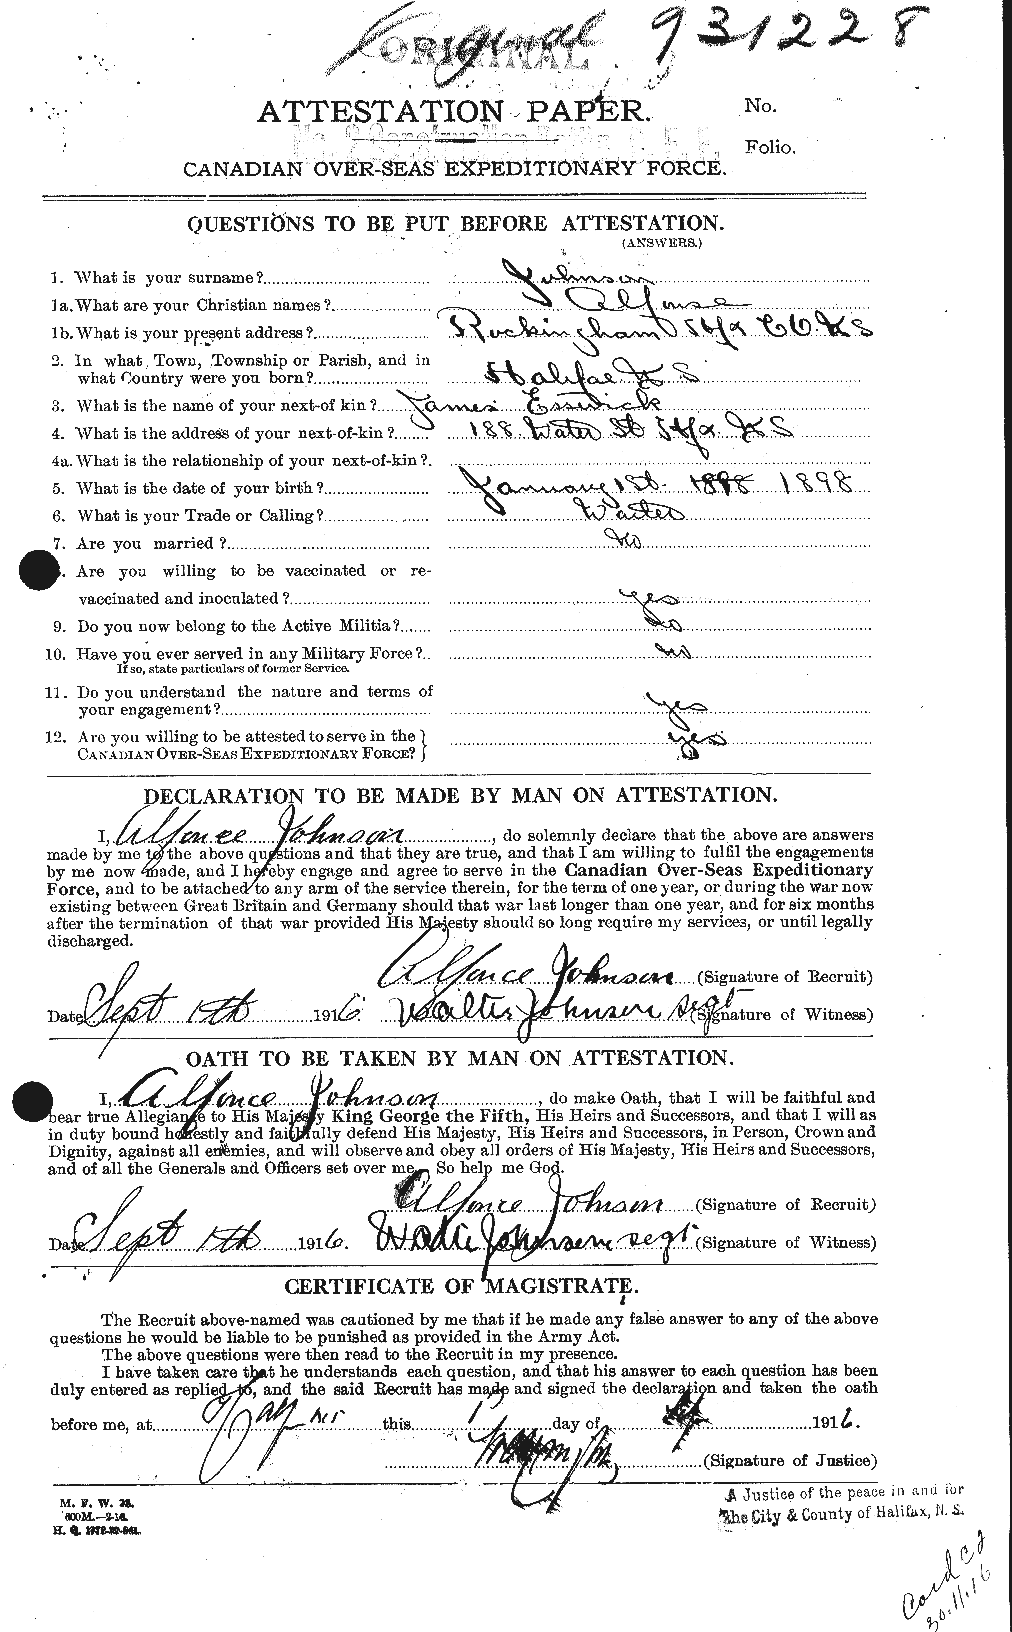 Personnel Records of the First World War - CEF 421166a